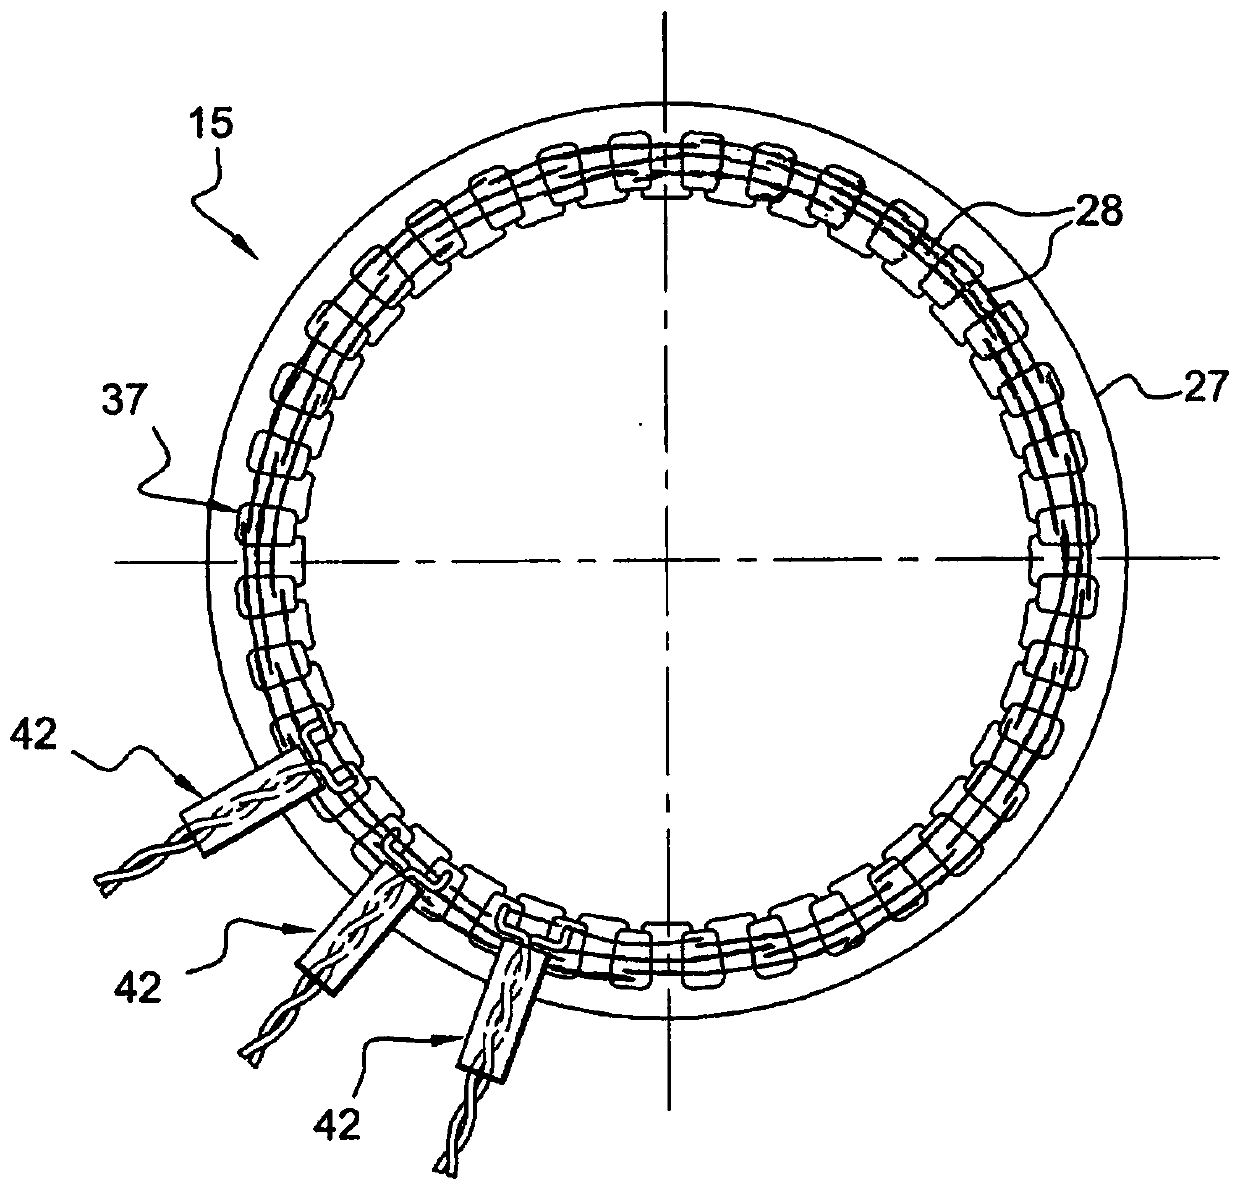 Wound stator for rotating electrical machine